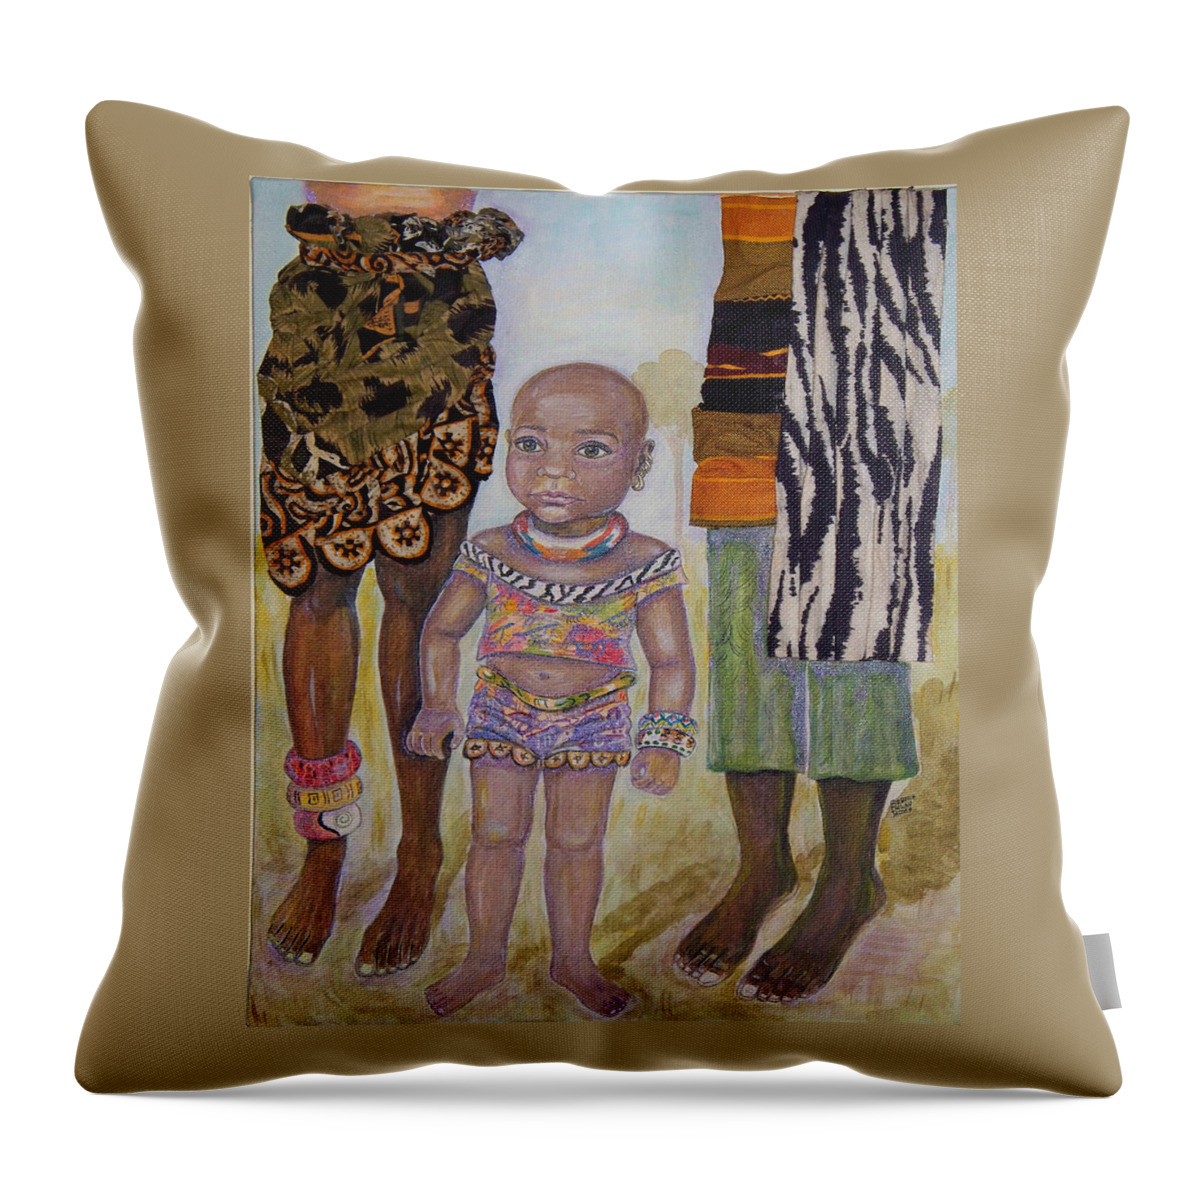 Child Throw Pillow featuring the painting Afrik Girl by Brenda Dulan Moore